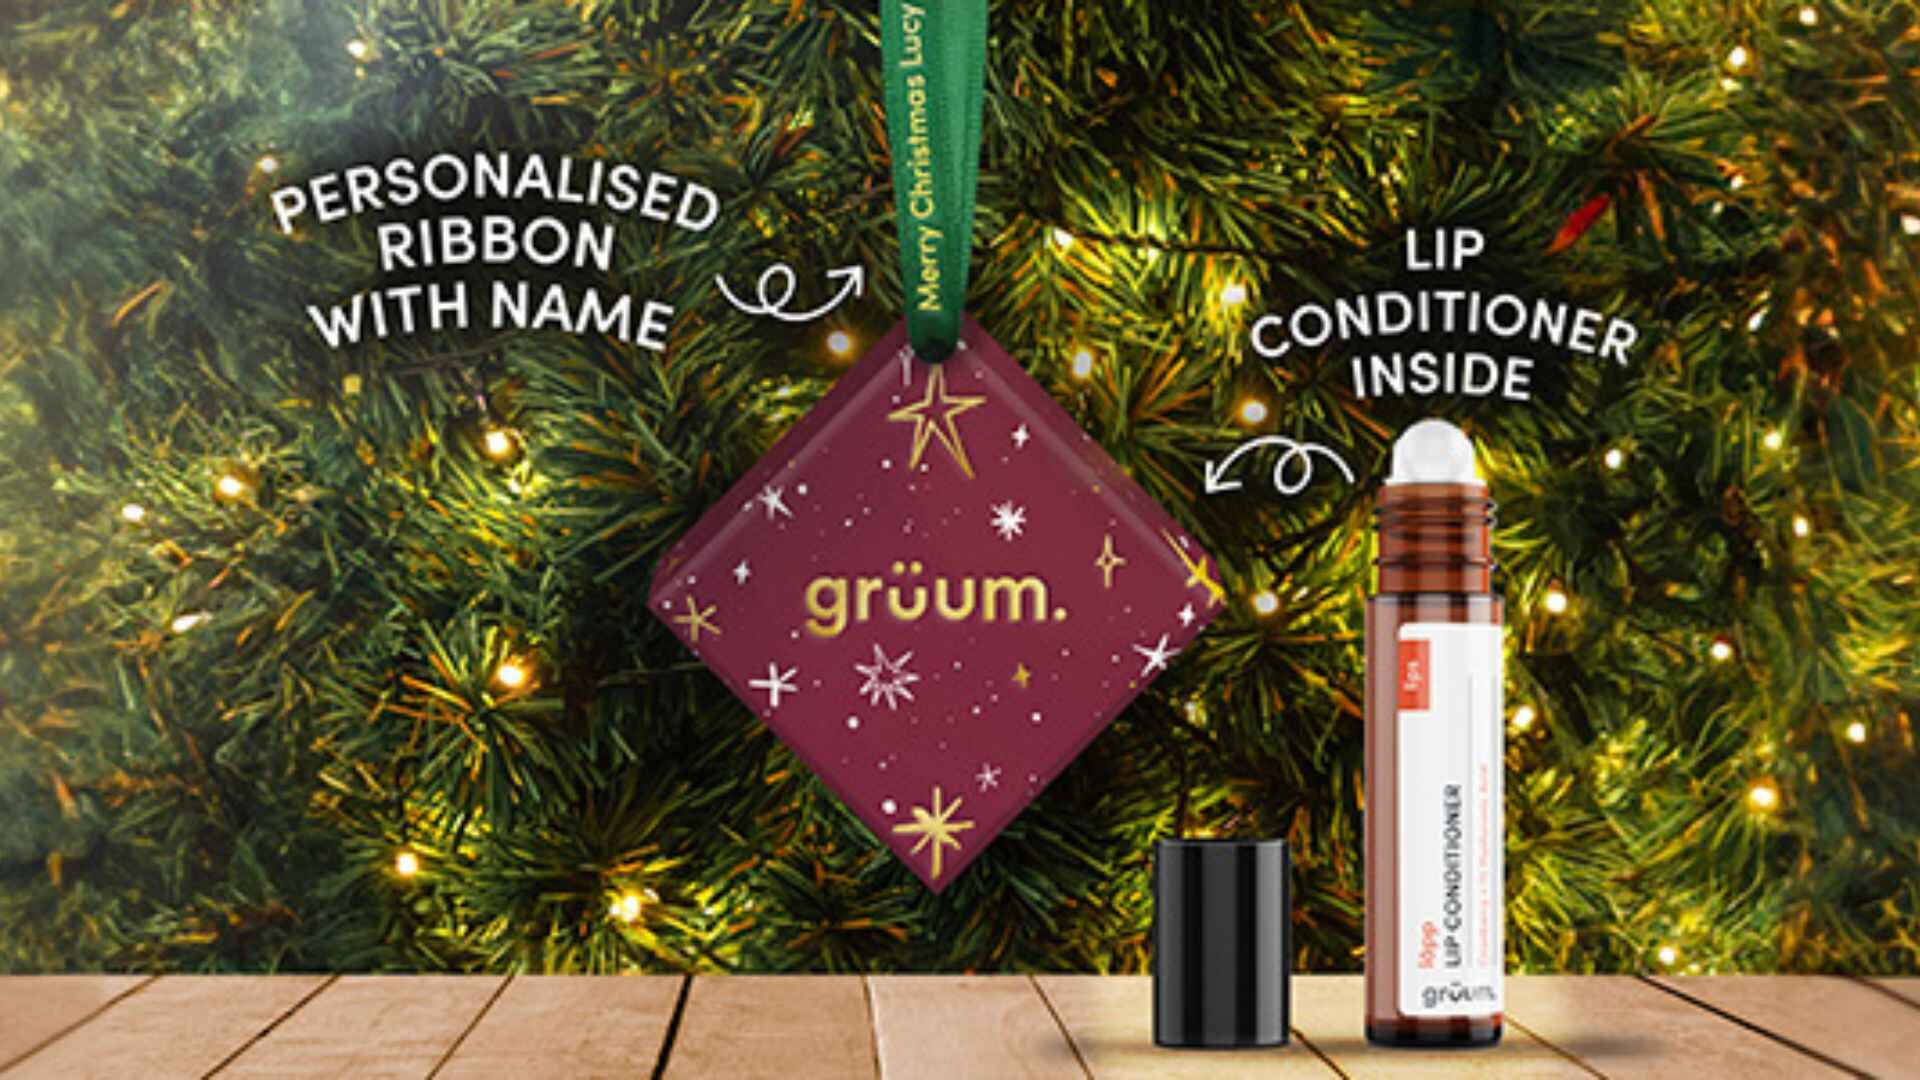 GET FREE LIP CONDITIONER +  PERSONALISED CHRISTMAS BAUBLE (WORTH £18)